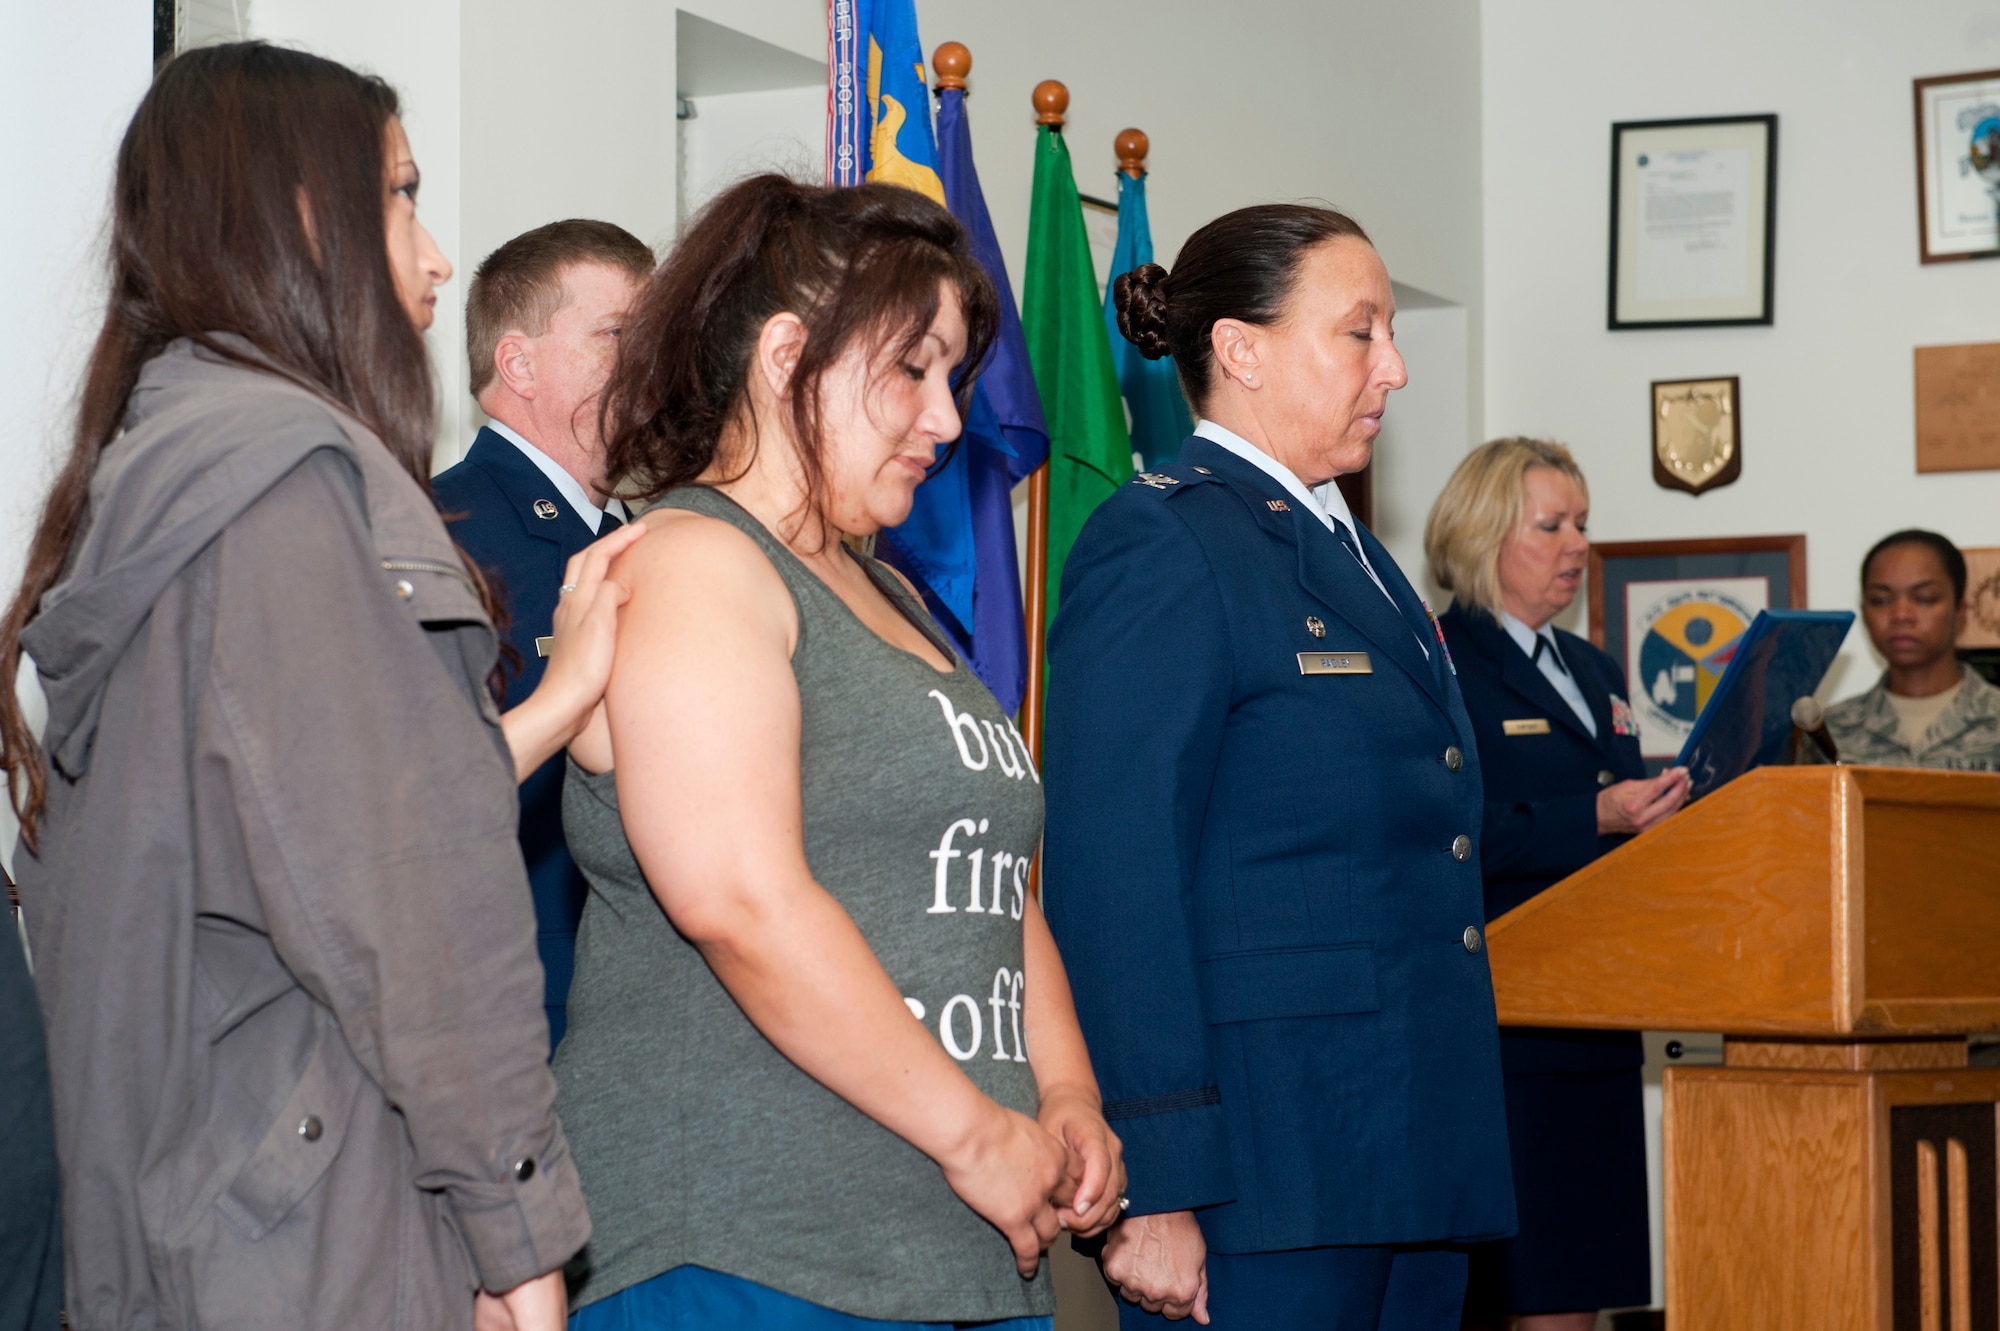 Jessica and Sophia Gervasio, the wife and daughter of U.S. Air Force Reserves Tech. Sgt. Isaac Gervasio, listen to an Airman with the 71st Aerial Port Squadron read Isaac’s accomplishments during a memorial ceremony at Langley Air Force Base, Va., May 14, 2016. The remembrance ceremony honored Gervasio and four other air transportation Airmen who lost their lives in 2015. (U.S. Air Force photo by Staff Sgt. R. Alex Durbin)